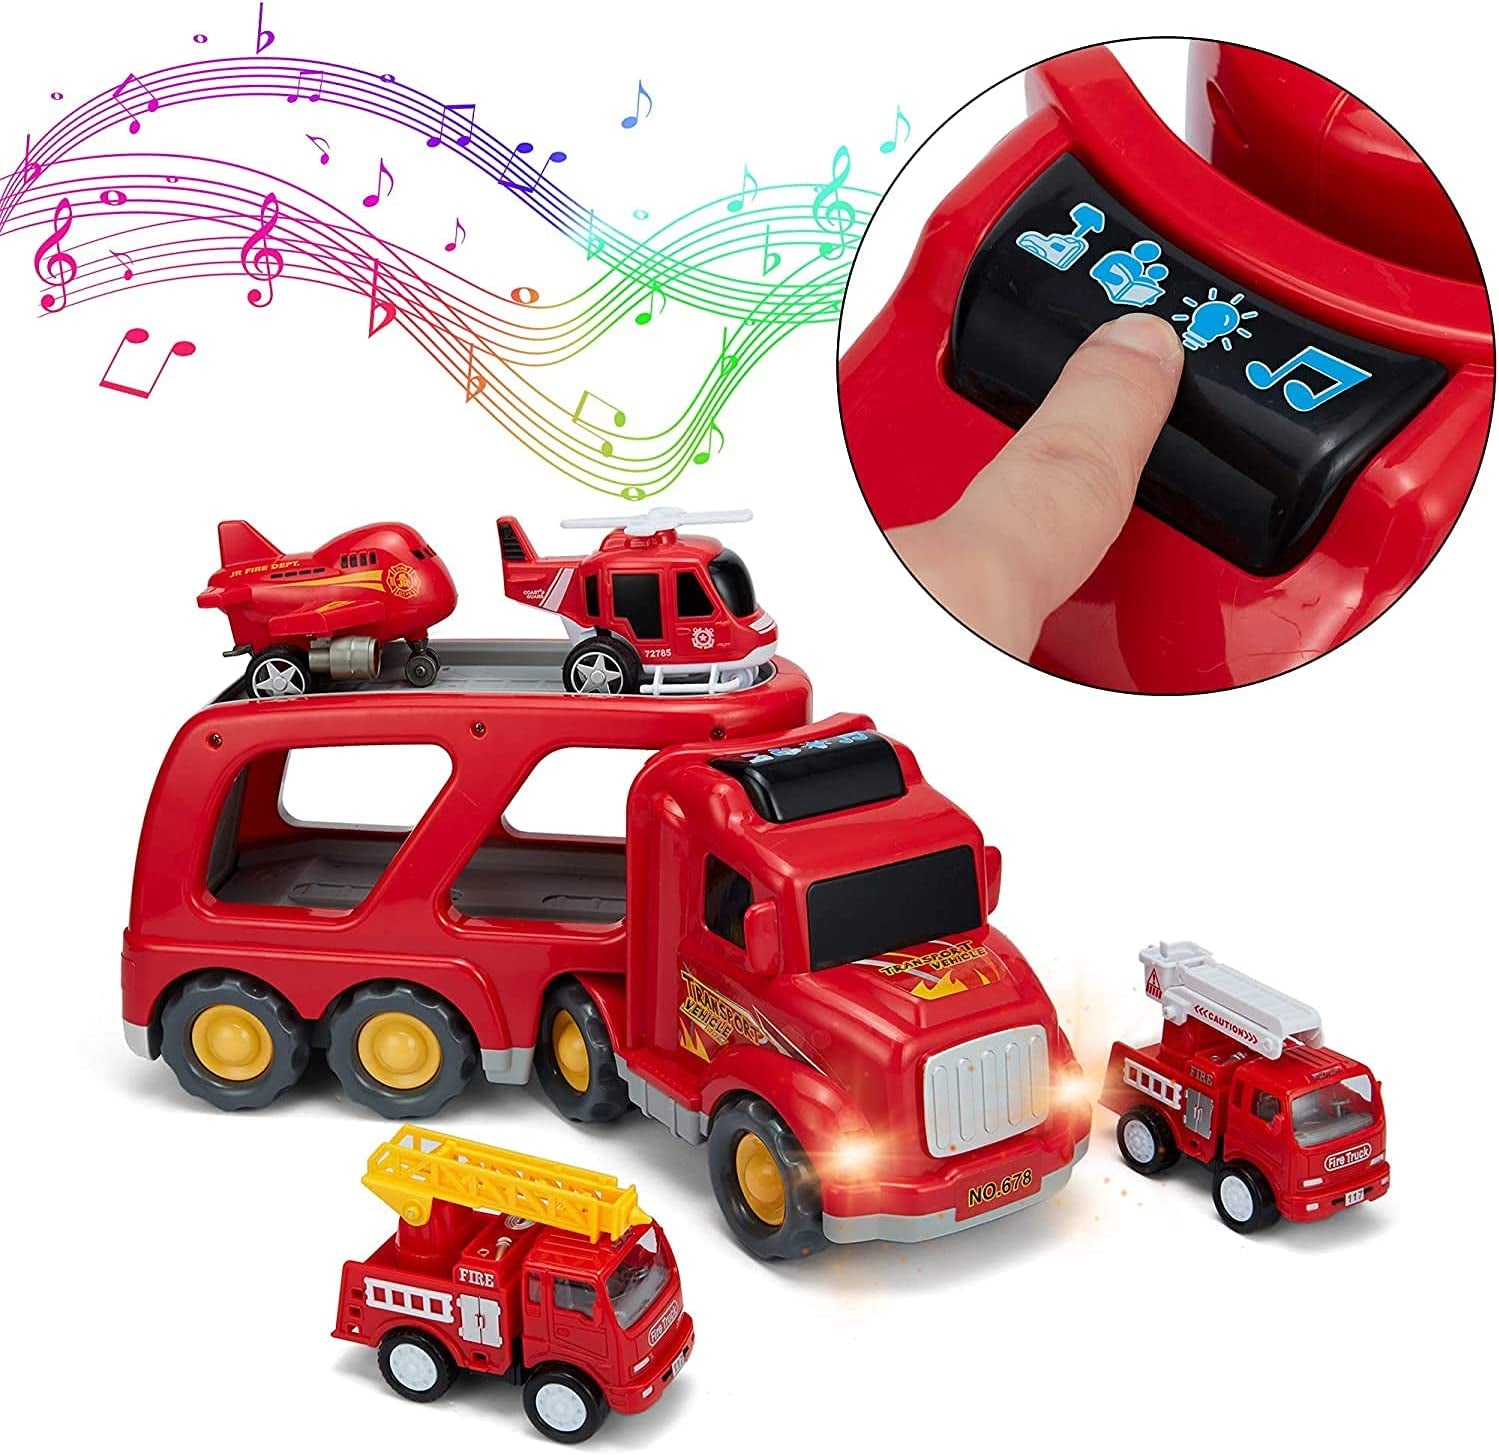 KIDS REPUBLIC Fire Carrier Truck Transport Car Play Vehicles - 5 in 1 Friction Power Toys for 4 5 6 7 Year Old Boys, Push and Go Vehicles